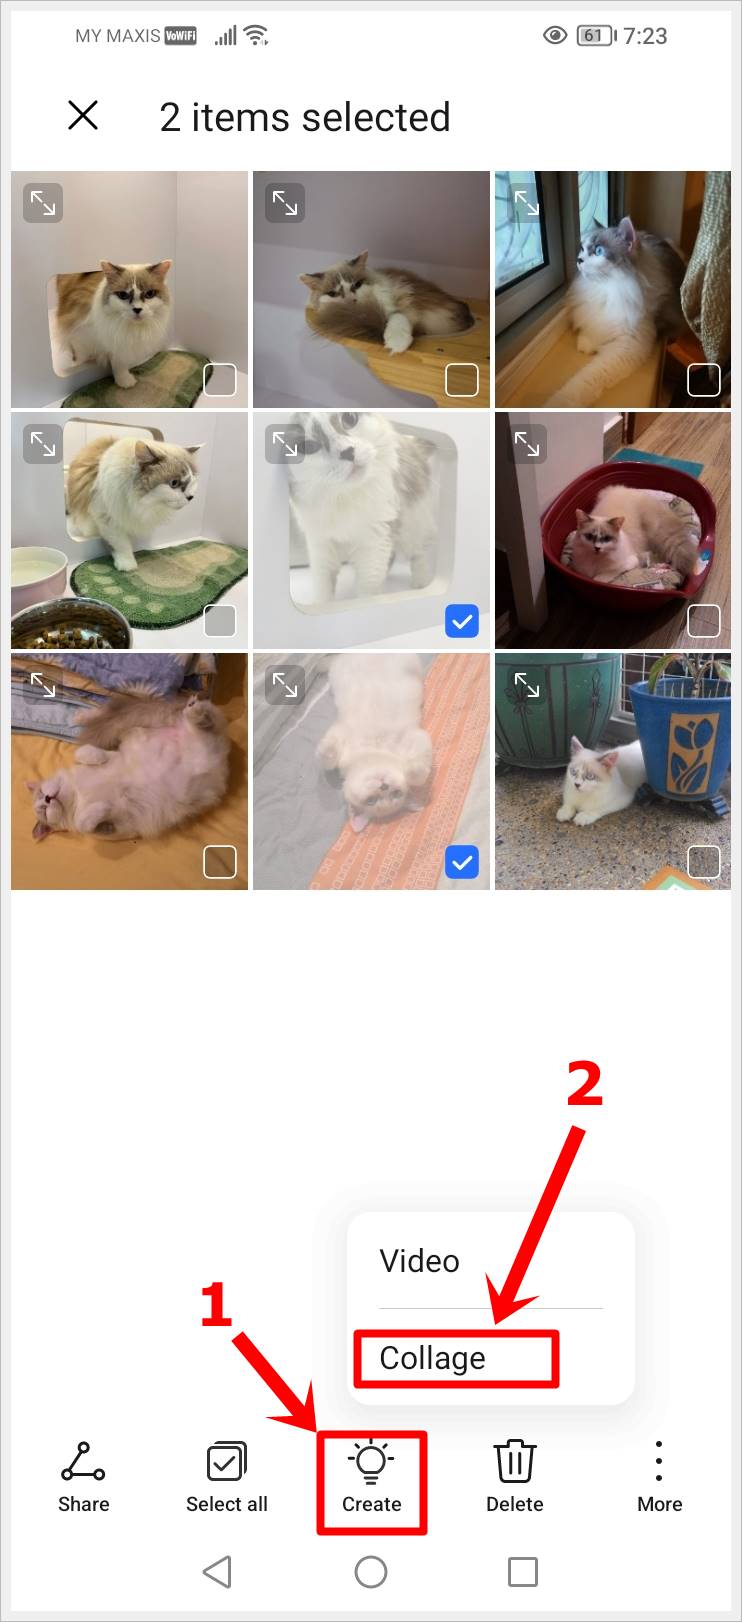 This image shows a screenshot of 2 randomly selected photos in the 'Gallery' app of an Android phone. The 'Collage' option has been highlighted indicating the intention of merging the 2 photos.